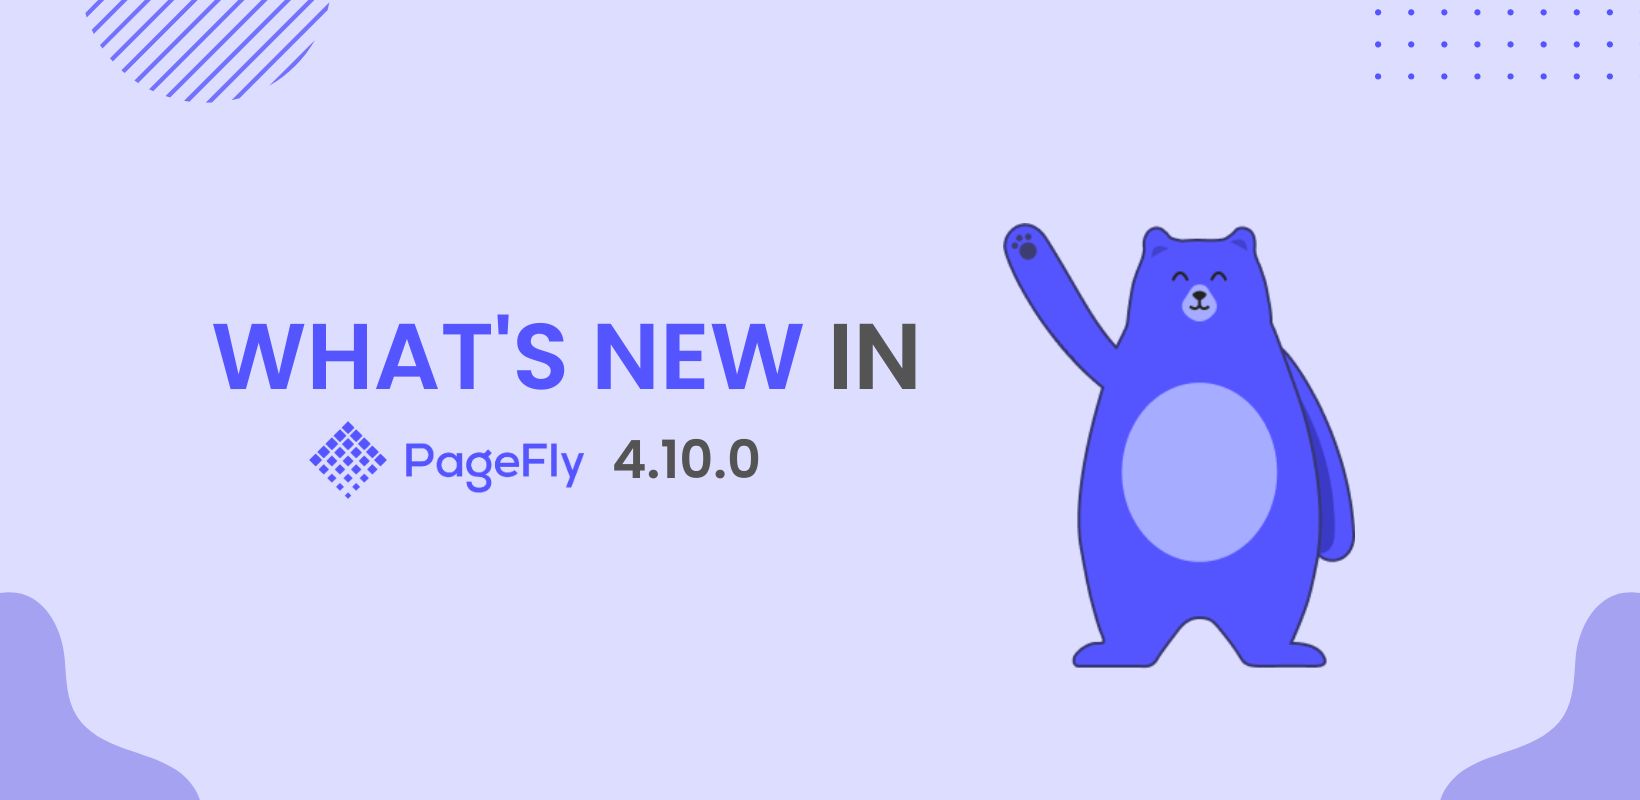 PageFly 4.10.0: Boost Up Store Performance with New 6 Integrations